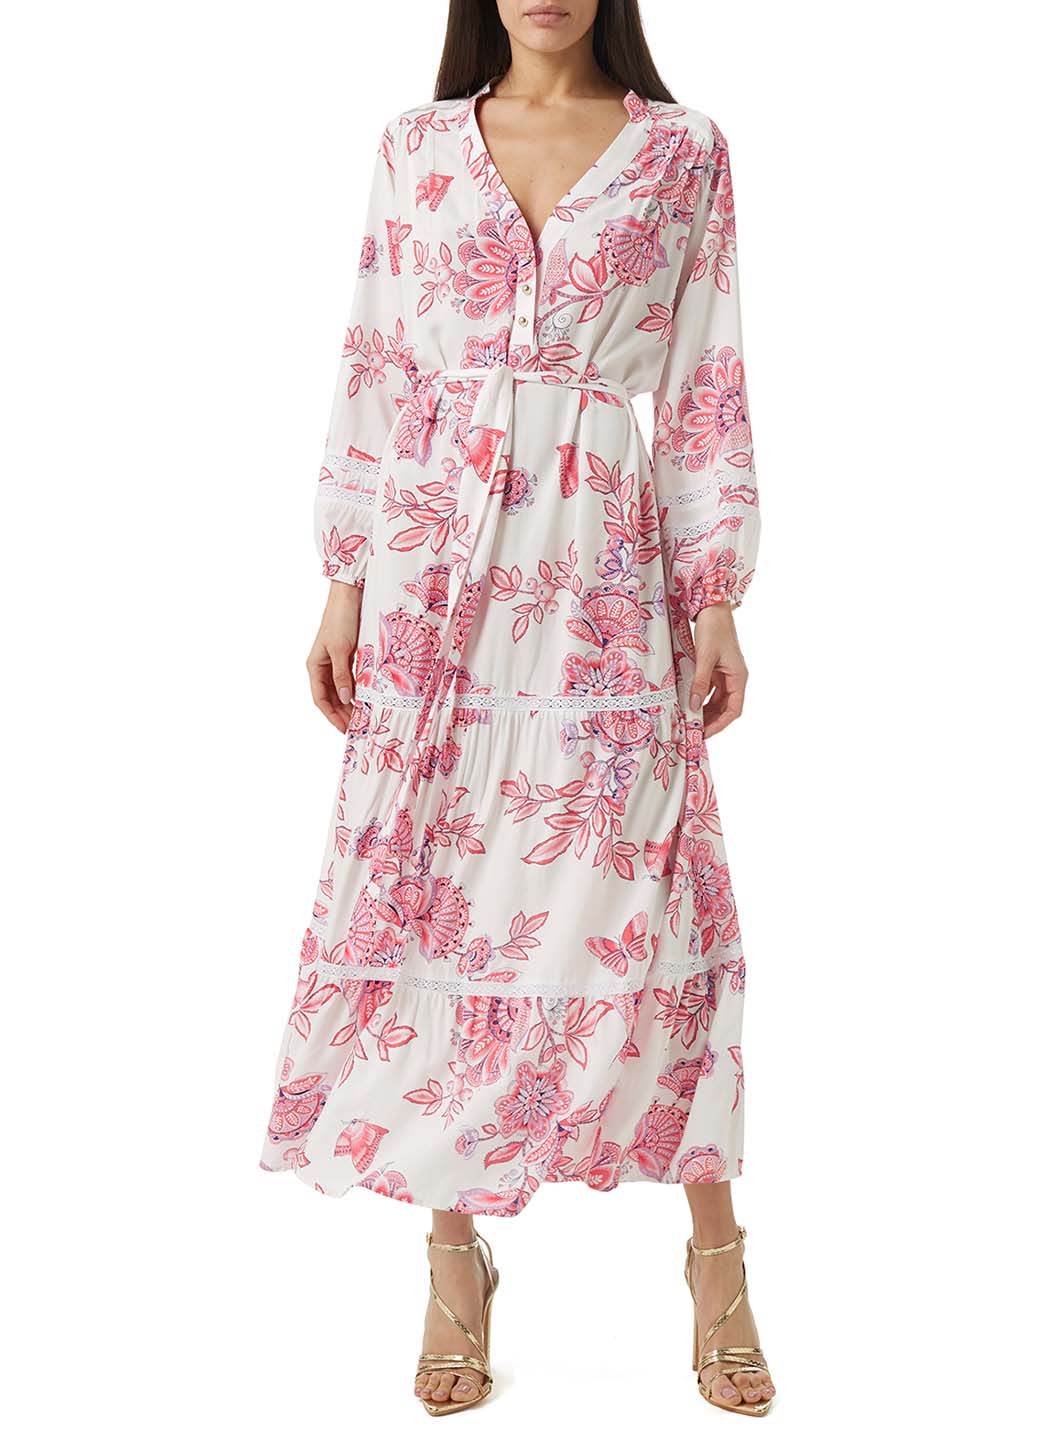 wisteria butterfly print maxi dress posed